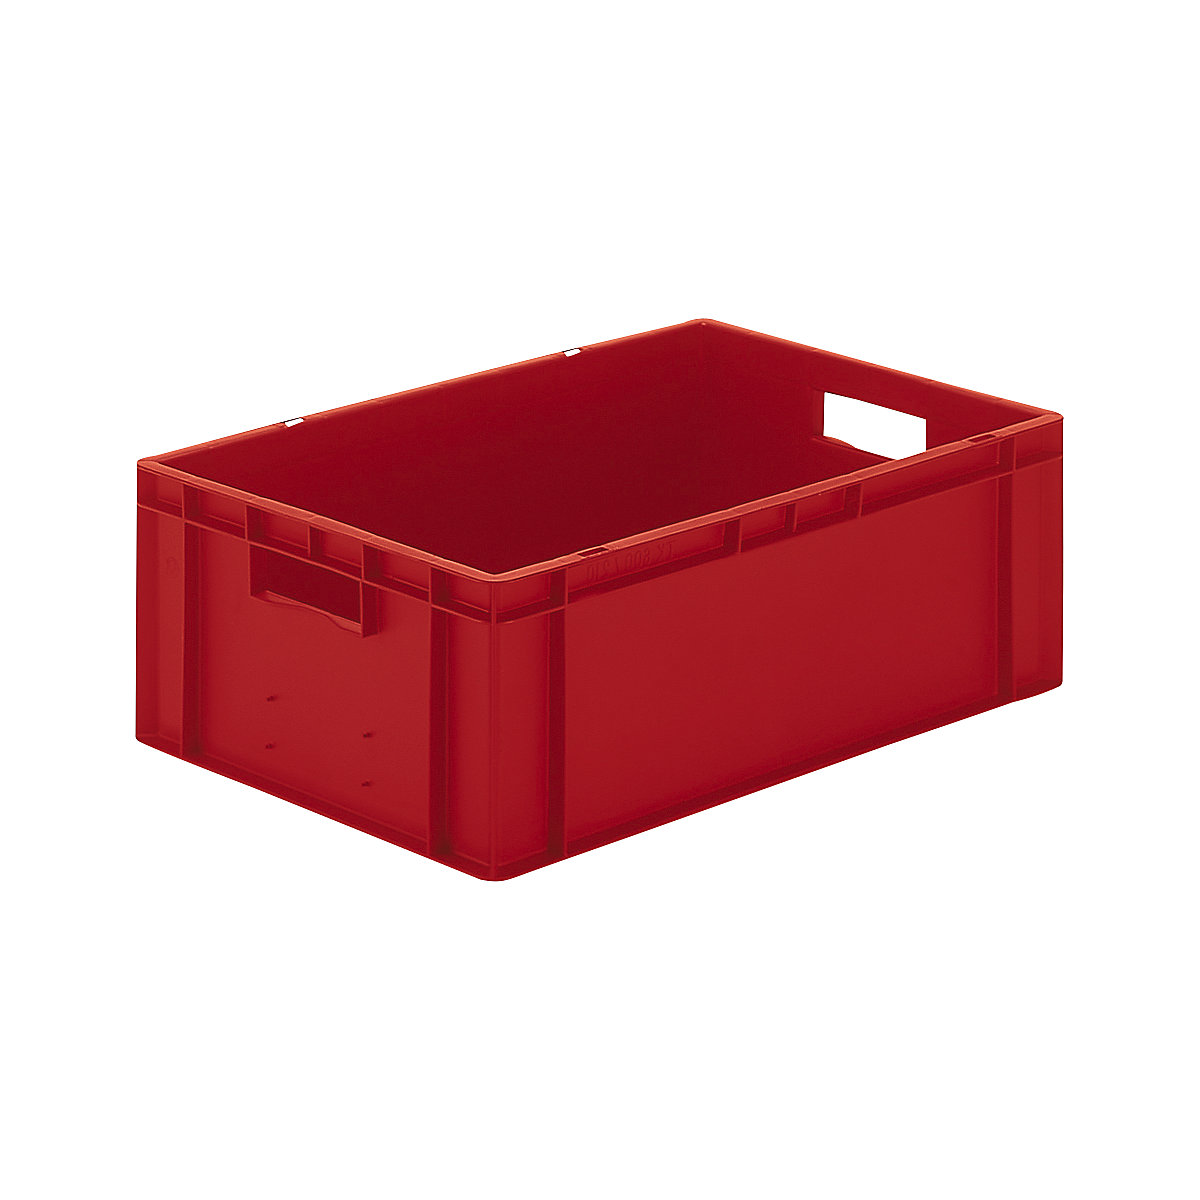 Euro stacking container, closed walls and base, LxWxH 600 x 400 x 210 mm, red, pack of 5-6